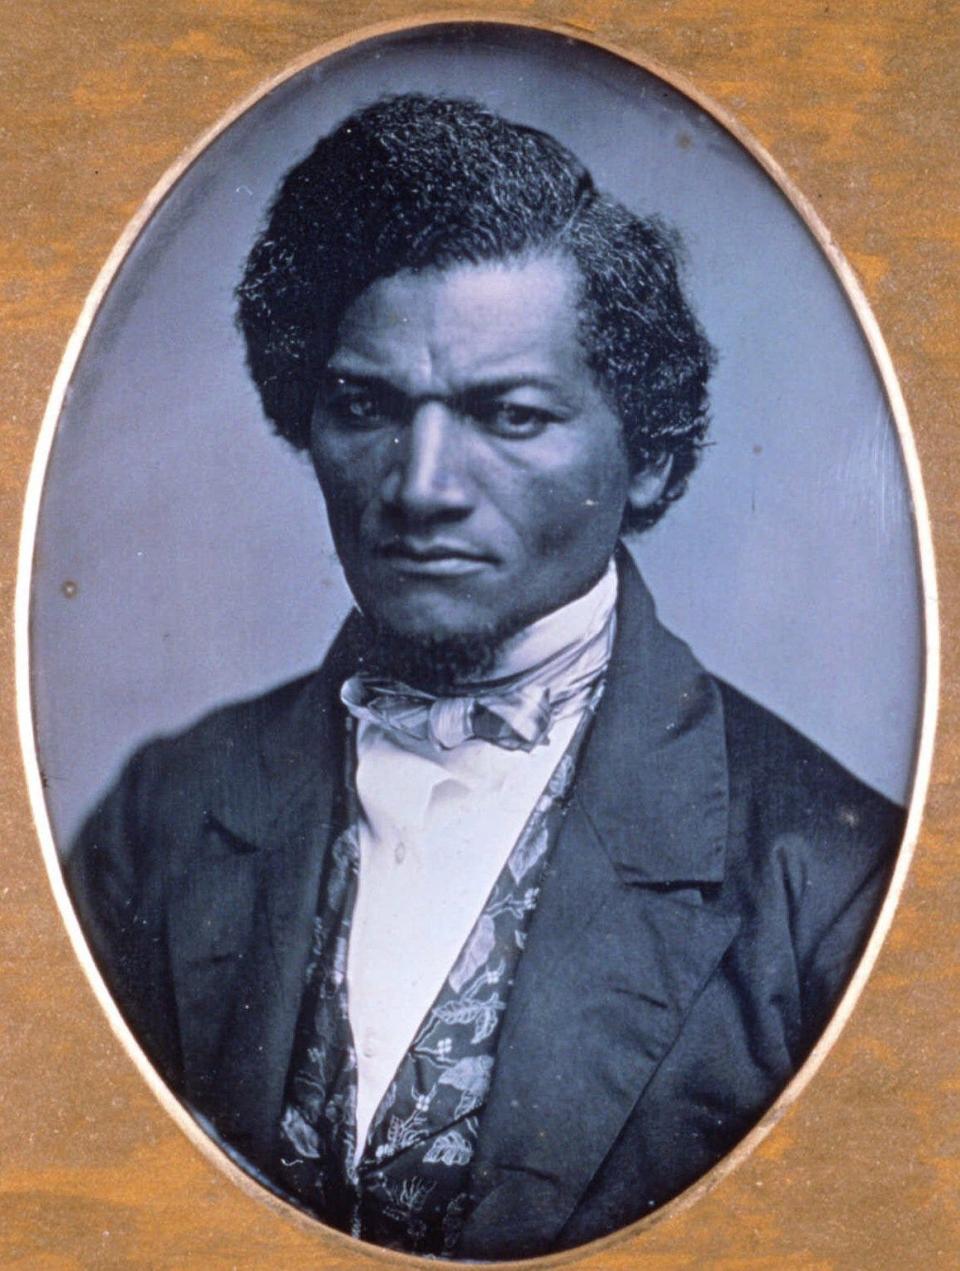 American abolitionist leader Fredrick Douglass is shown in this rare daguerreotype, taken circa 1847/52 by Samuel J. Miller. It is from the permanent collection of the Chicago Art Institute.